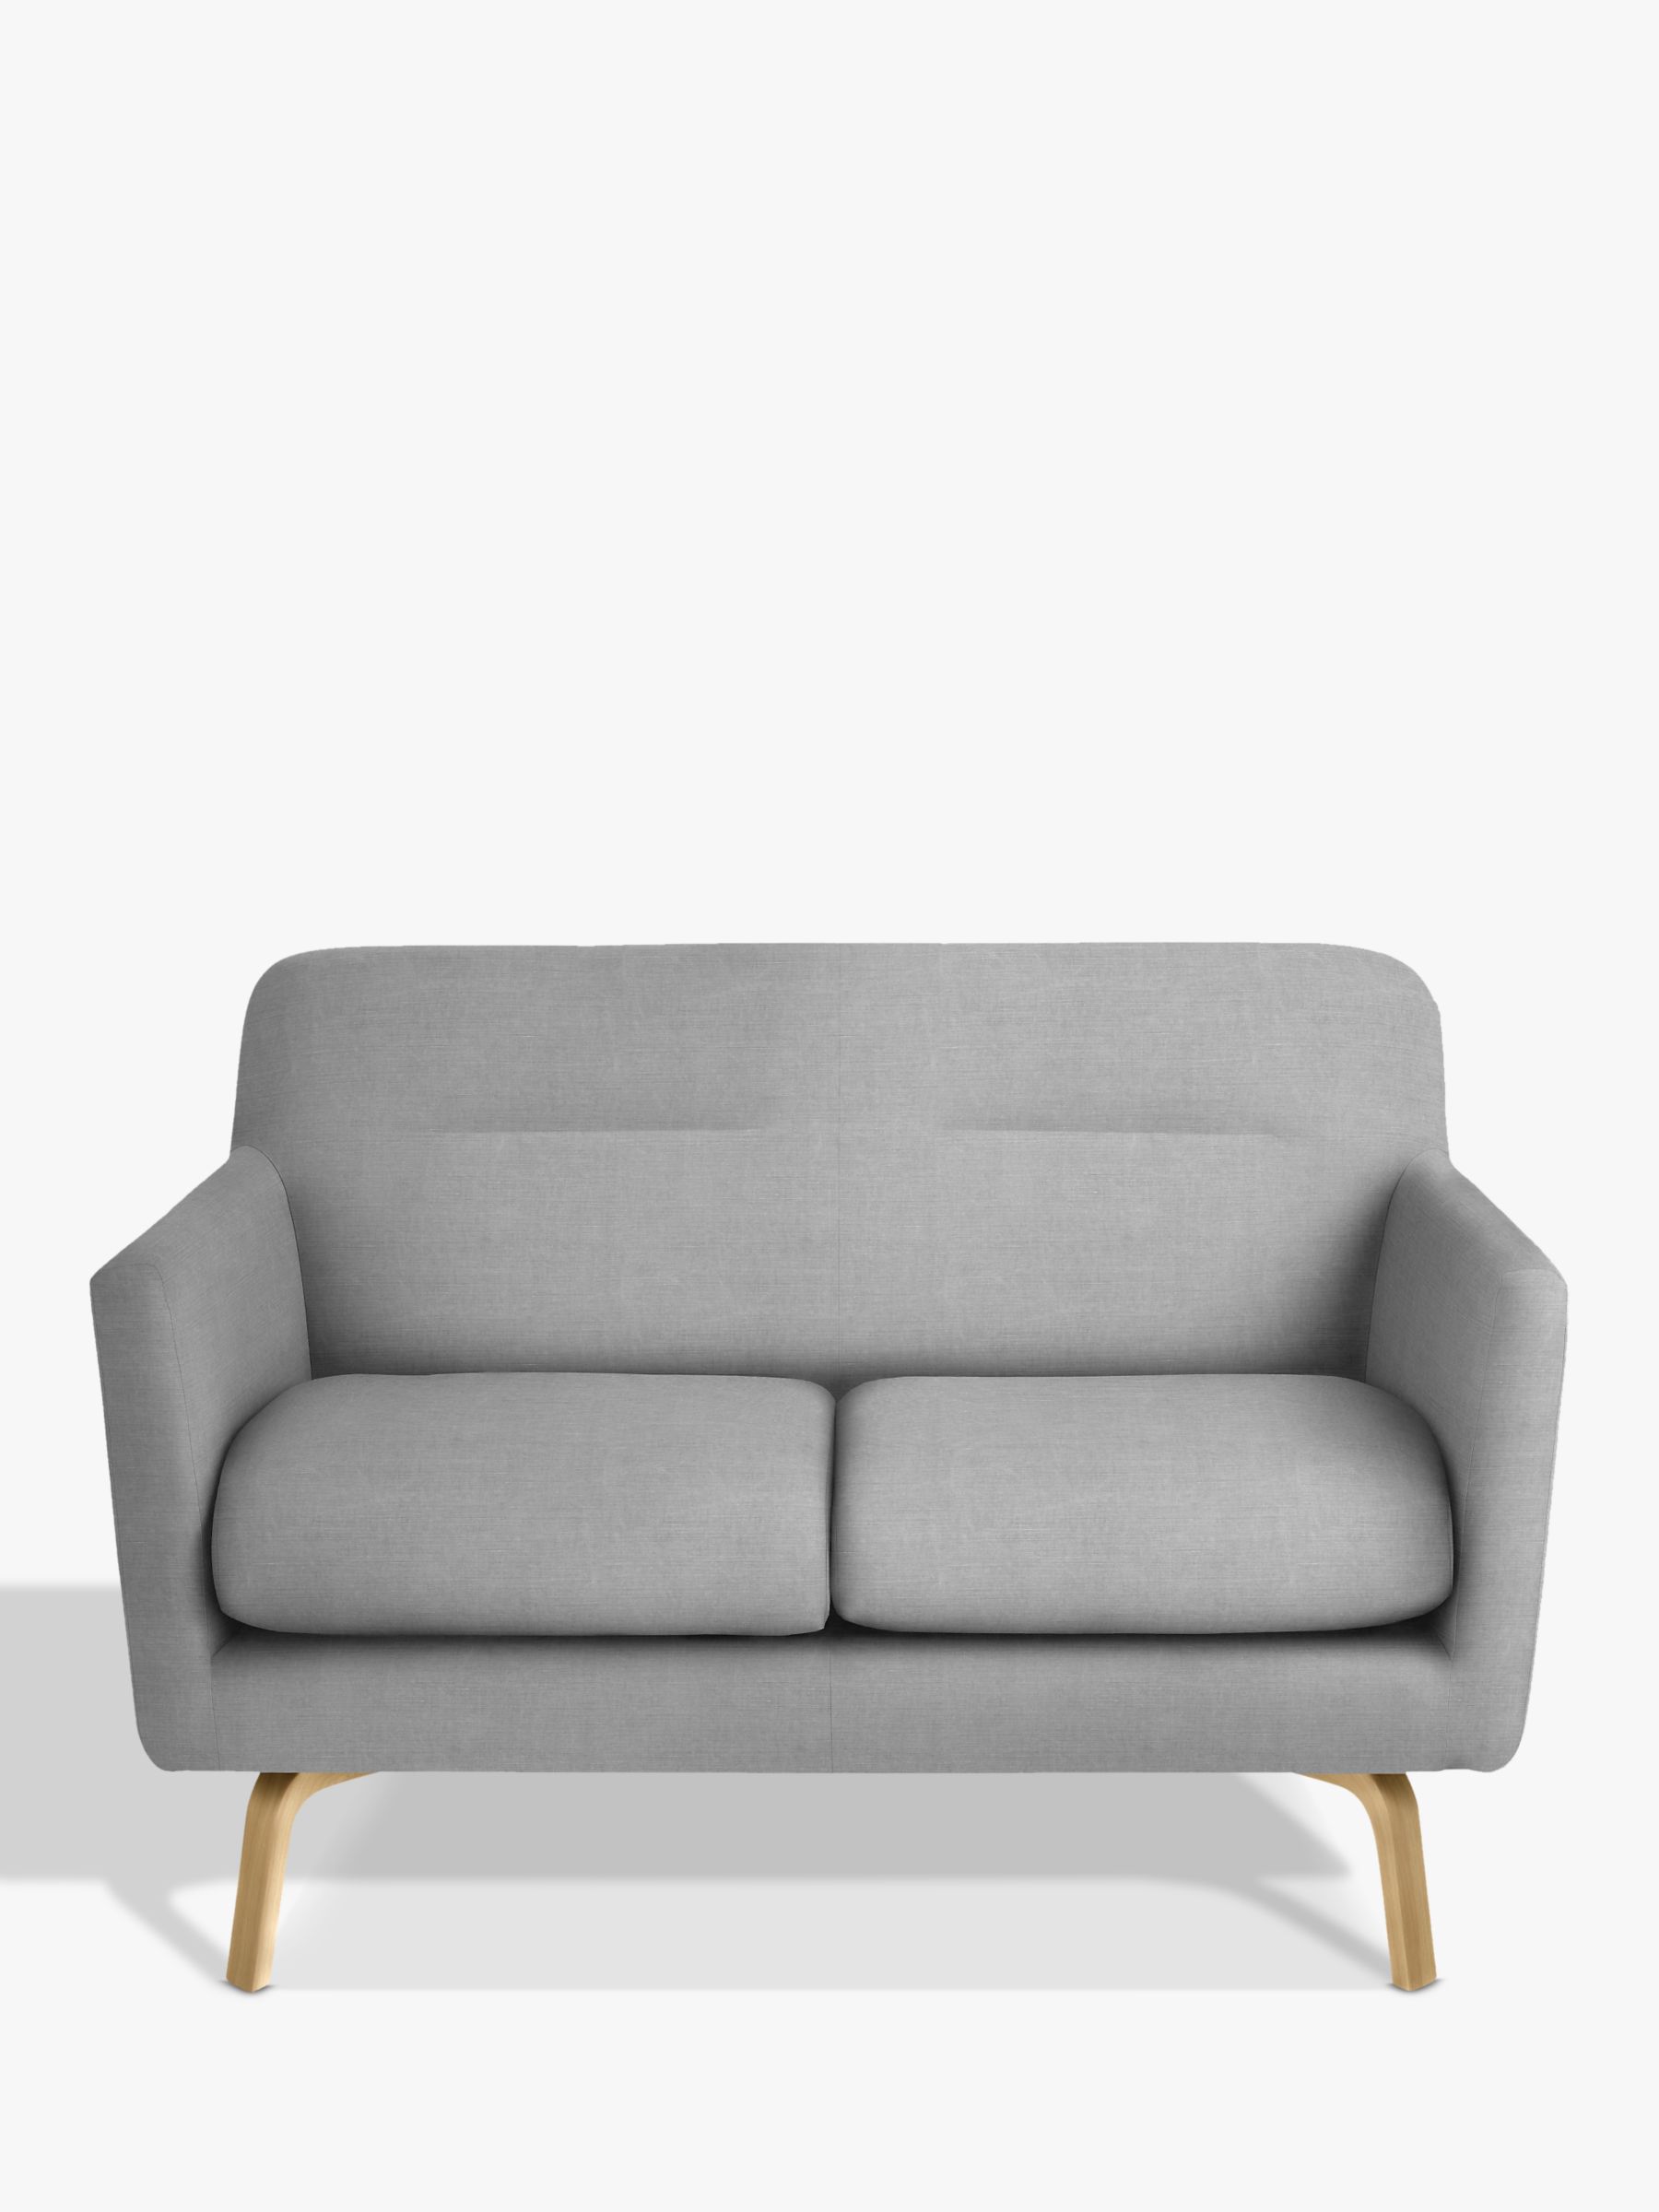 House By John Lewis Archie Ii Small 2 Seater Sofa